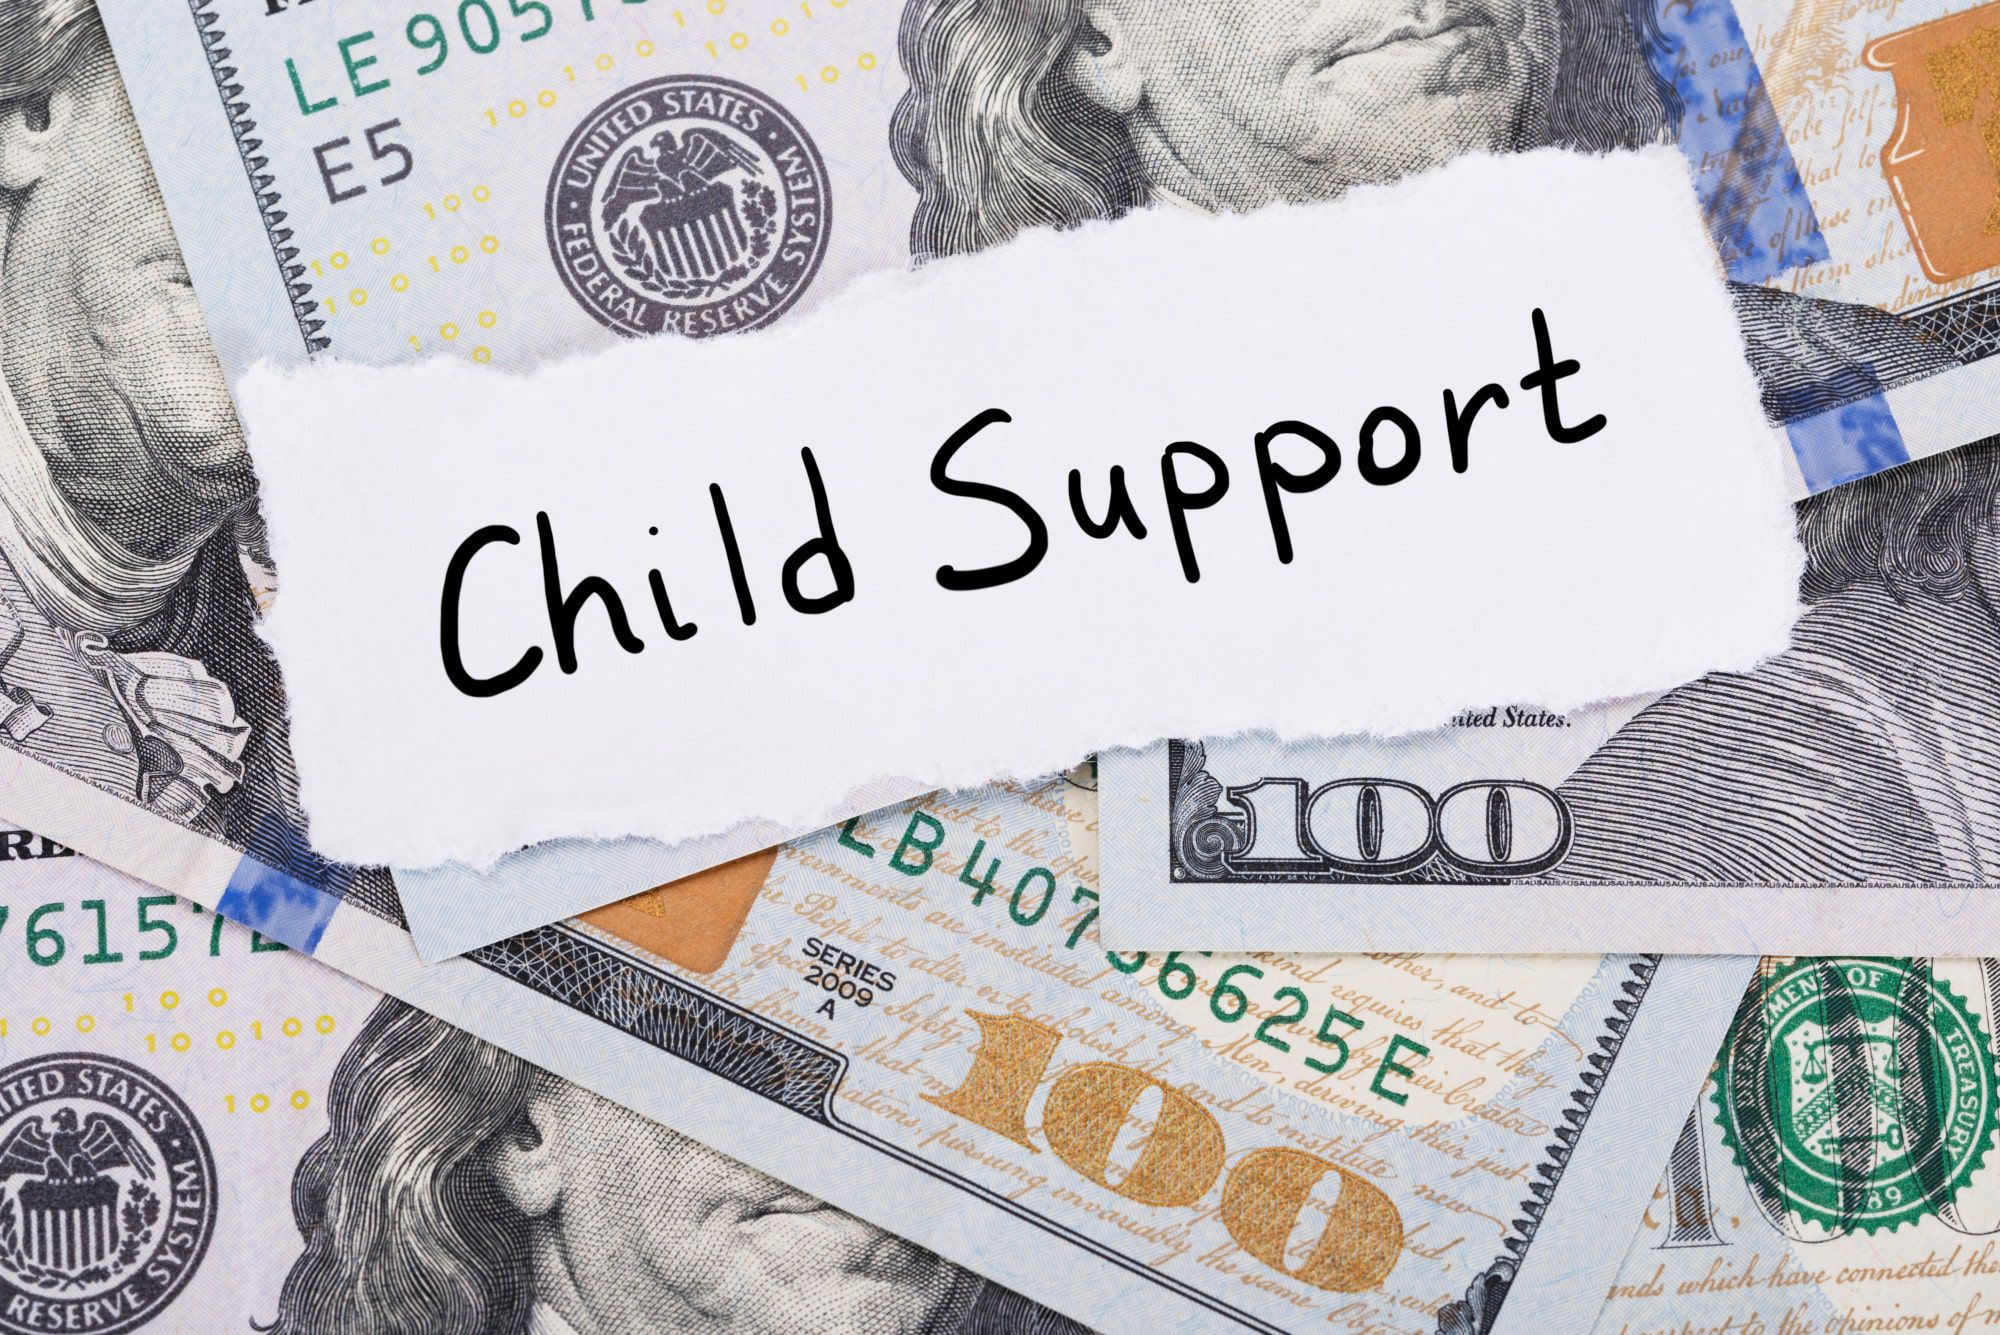 How to Figure Child Support into Your Budget